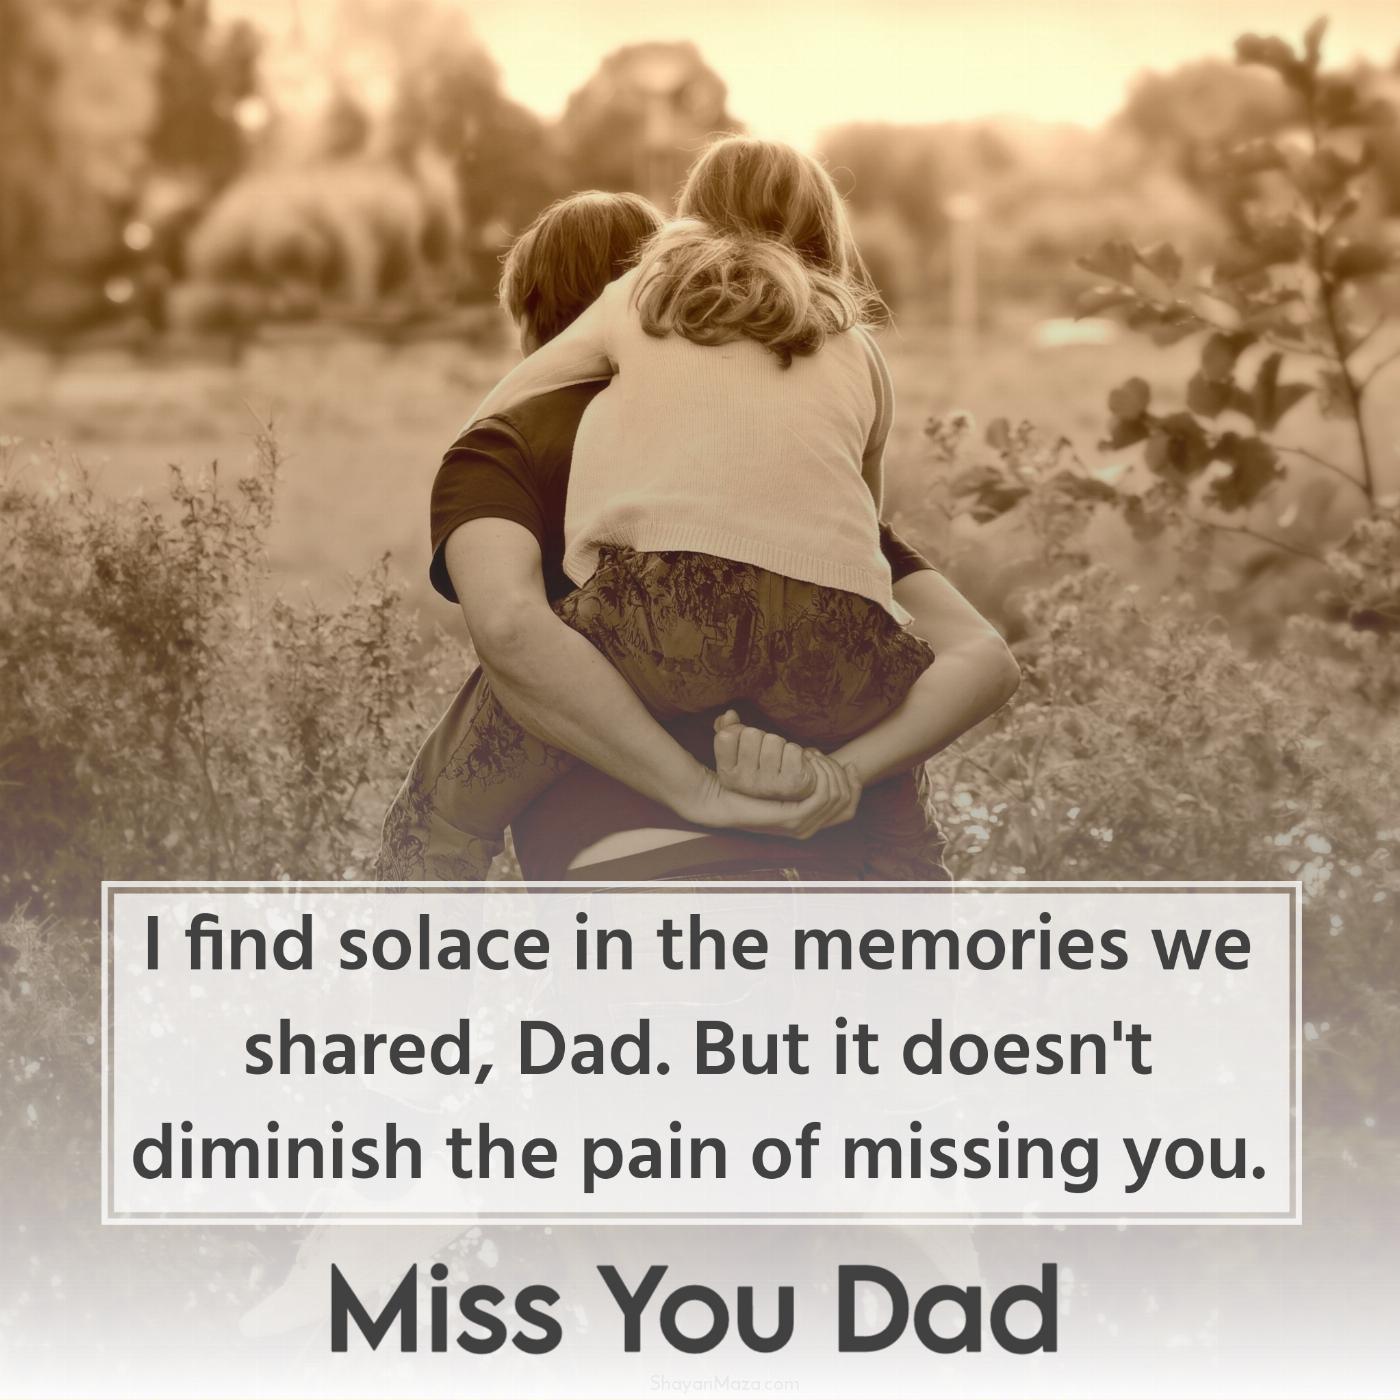 I find solace in the memories we shared Dad